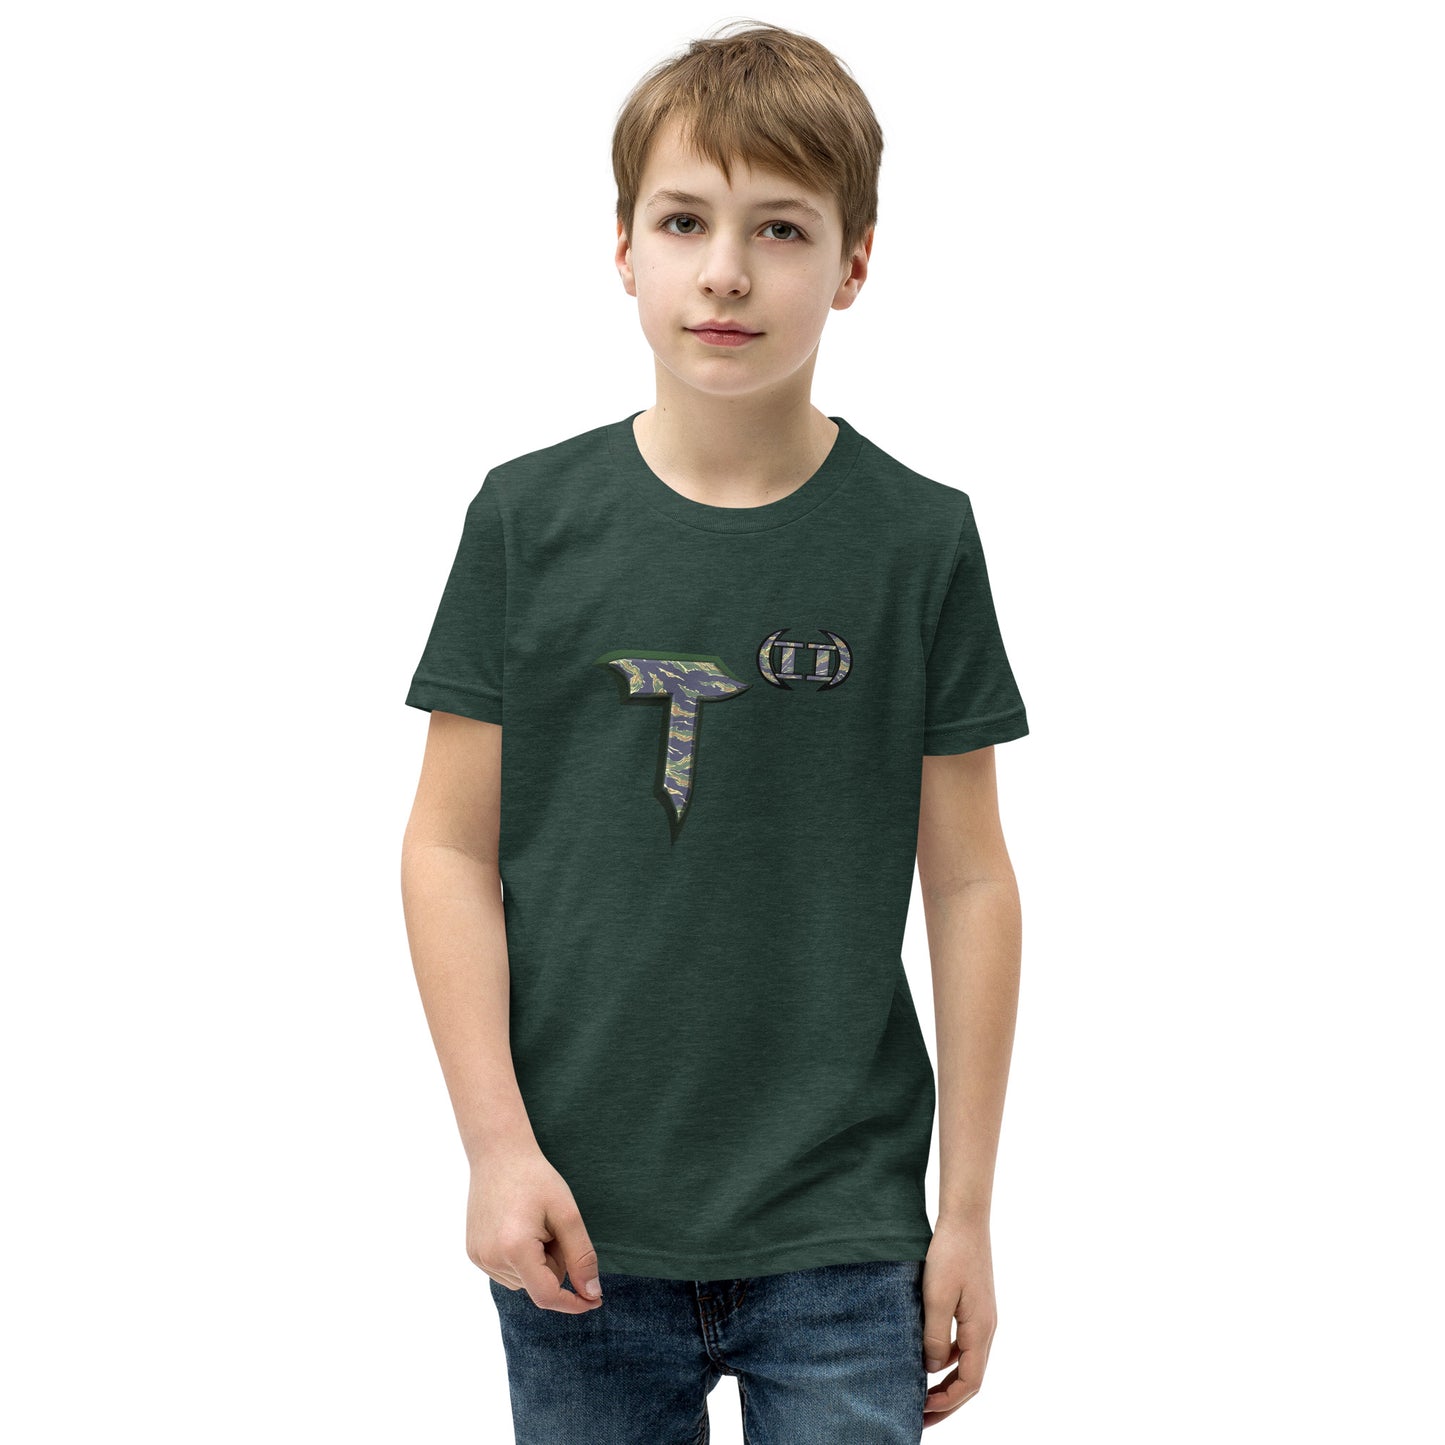 Youth Short Sleeve T-Shirt T(2) Tiger Stripe Camo Edition